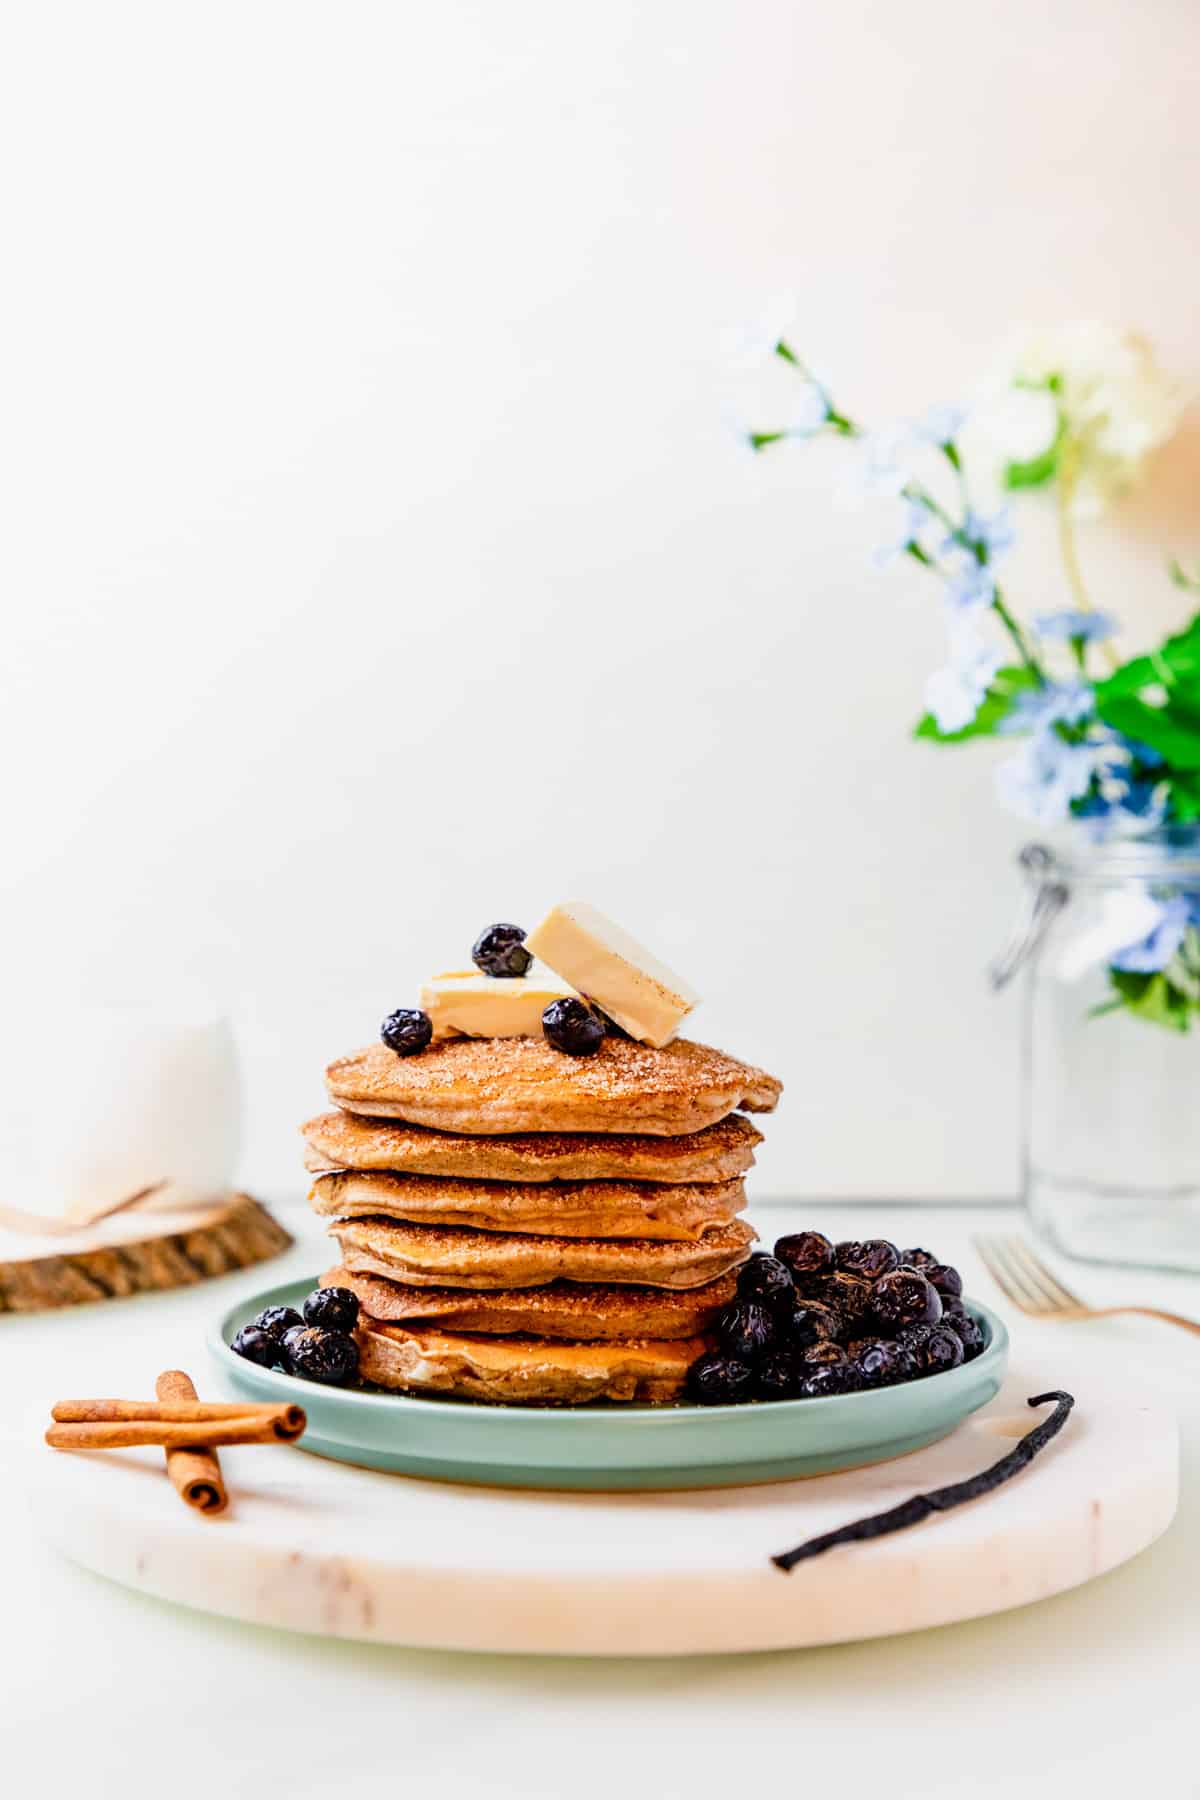 gluten free snickerdoodle pancakes stacked on top of each other on a blue plate.